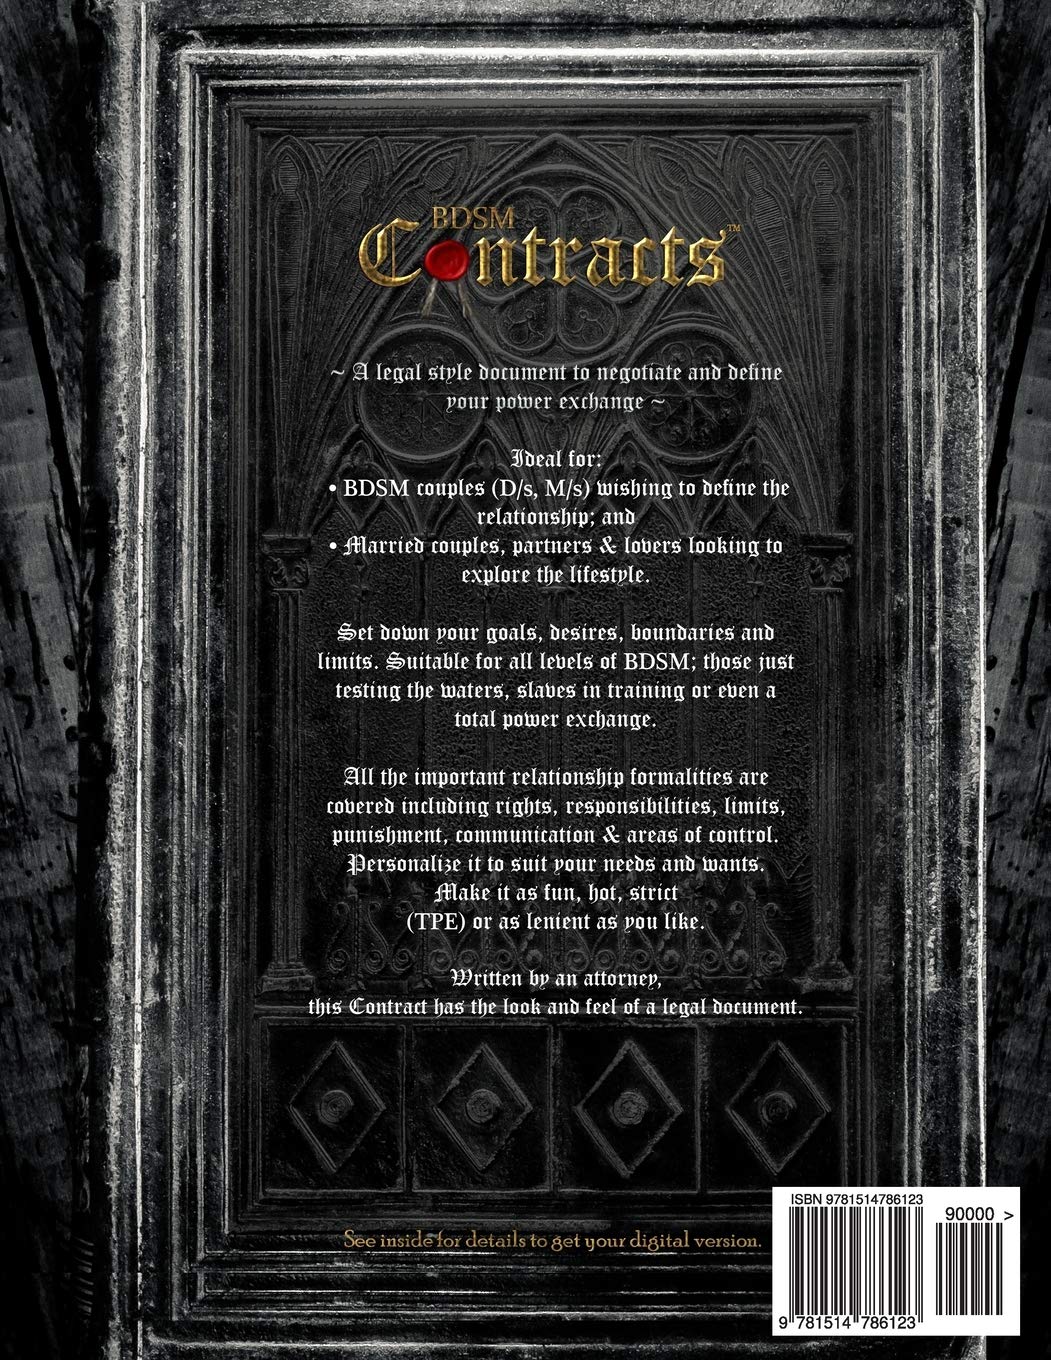 The back cover of BDSM Contracts - Lily F.